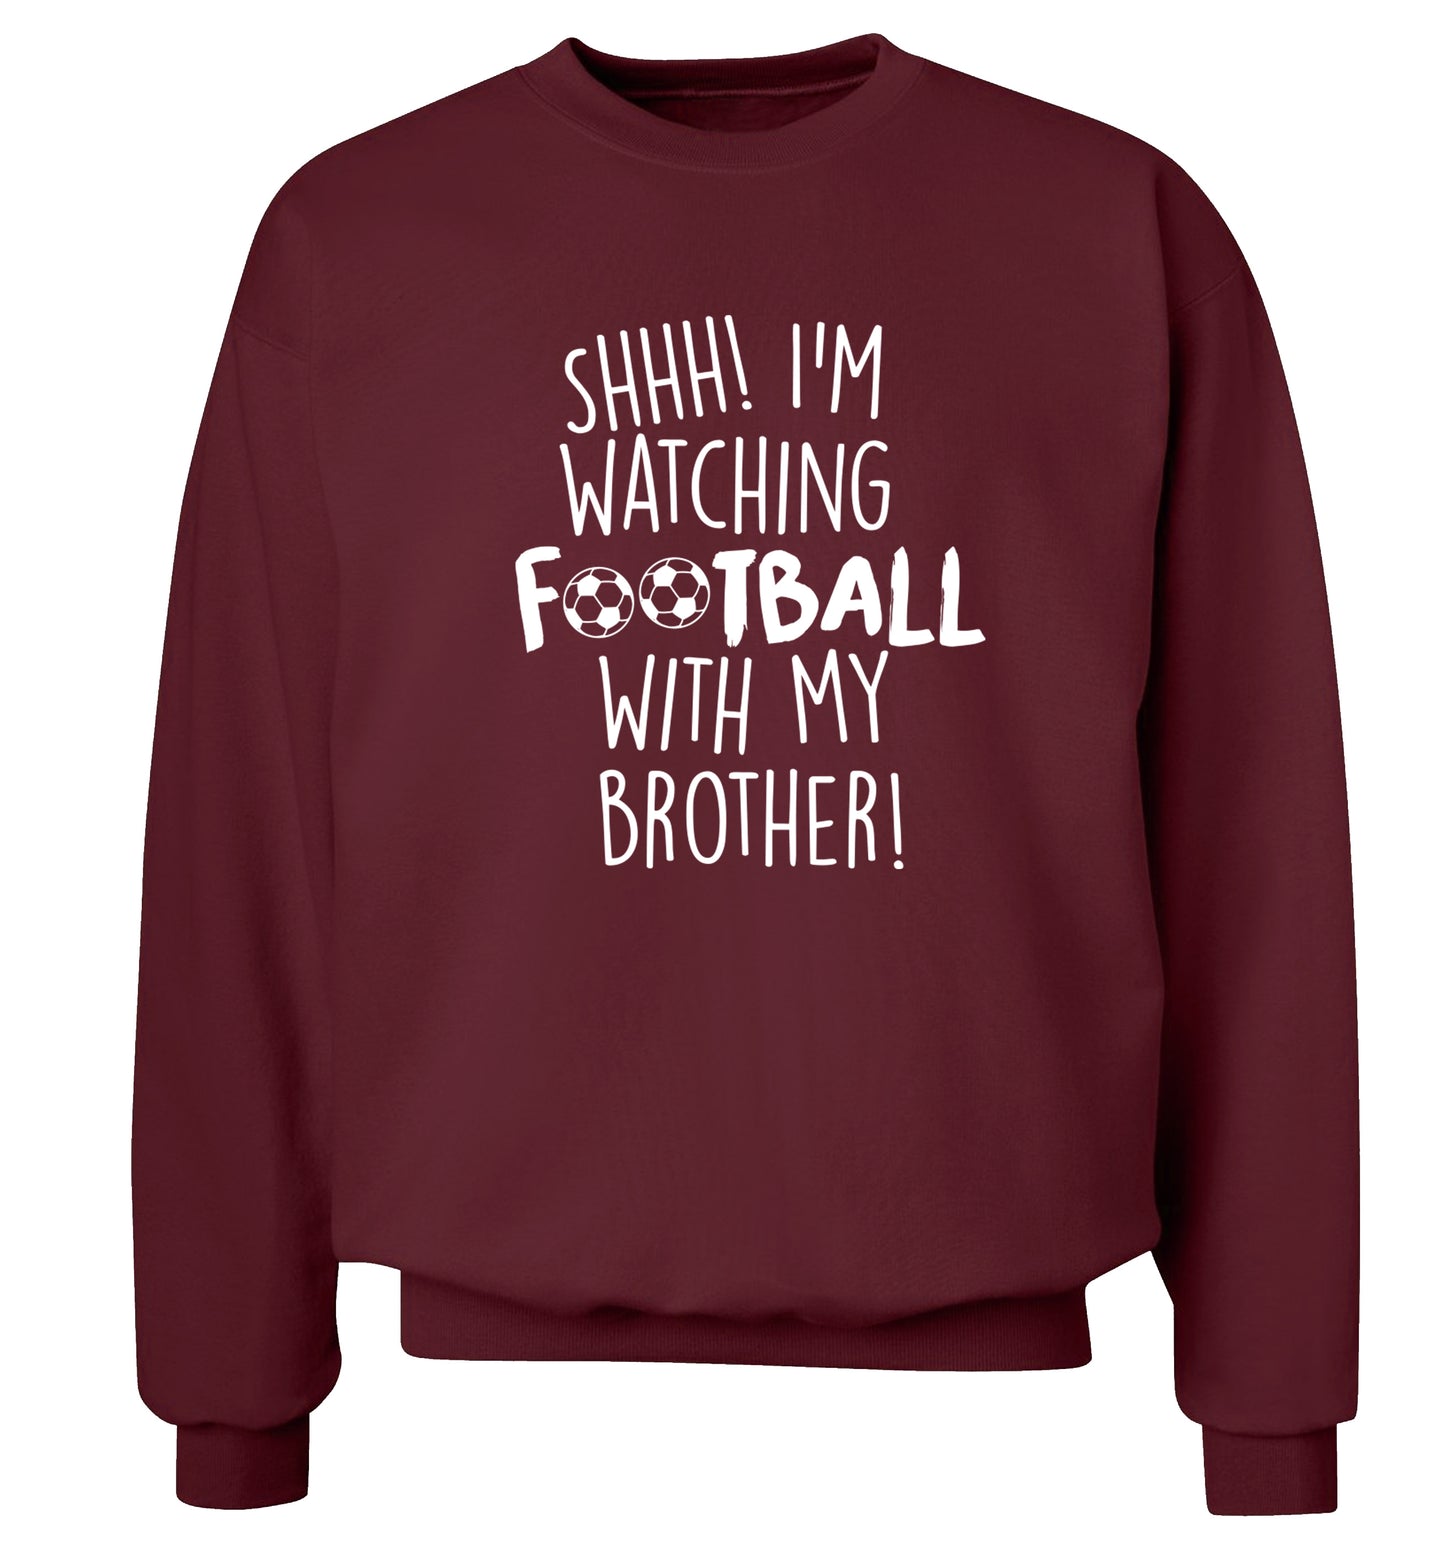 Shhh I'm watching football with my brother Adult's unisexmaroon Sweater 2XL